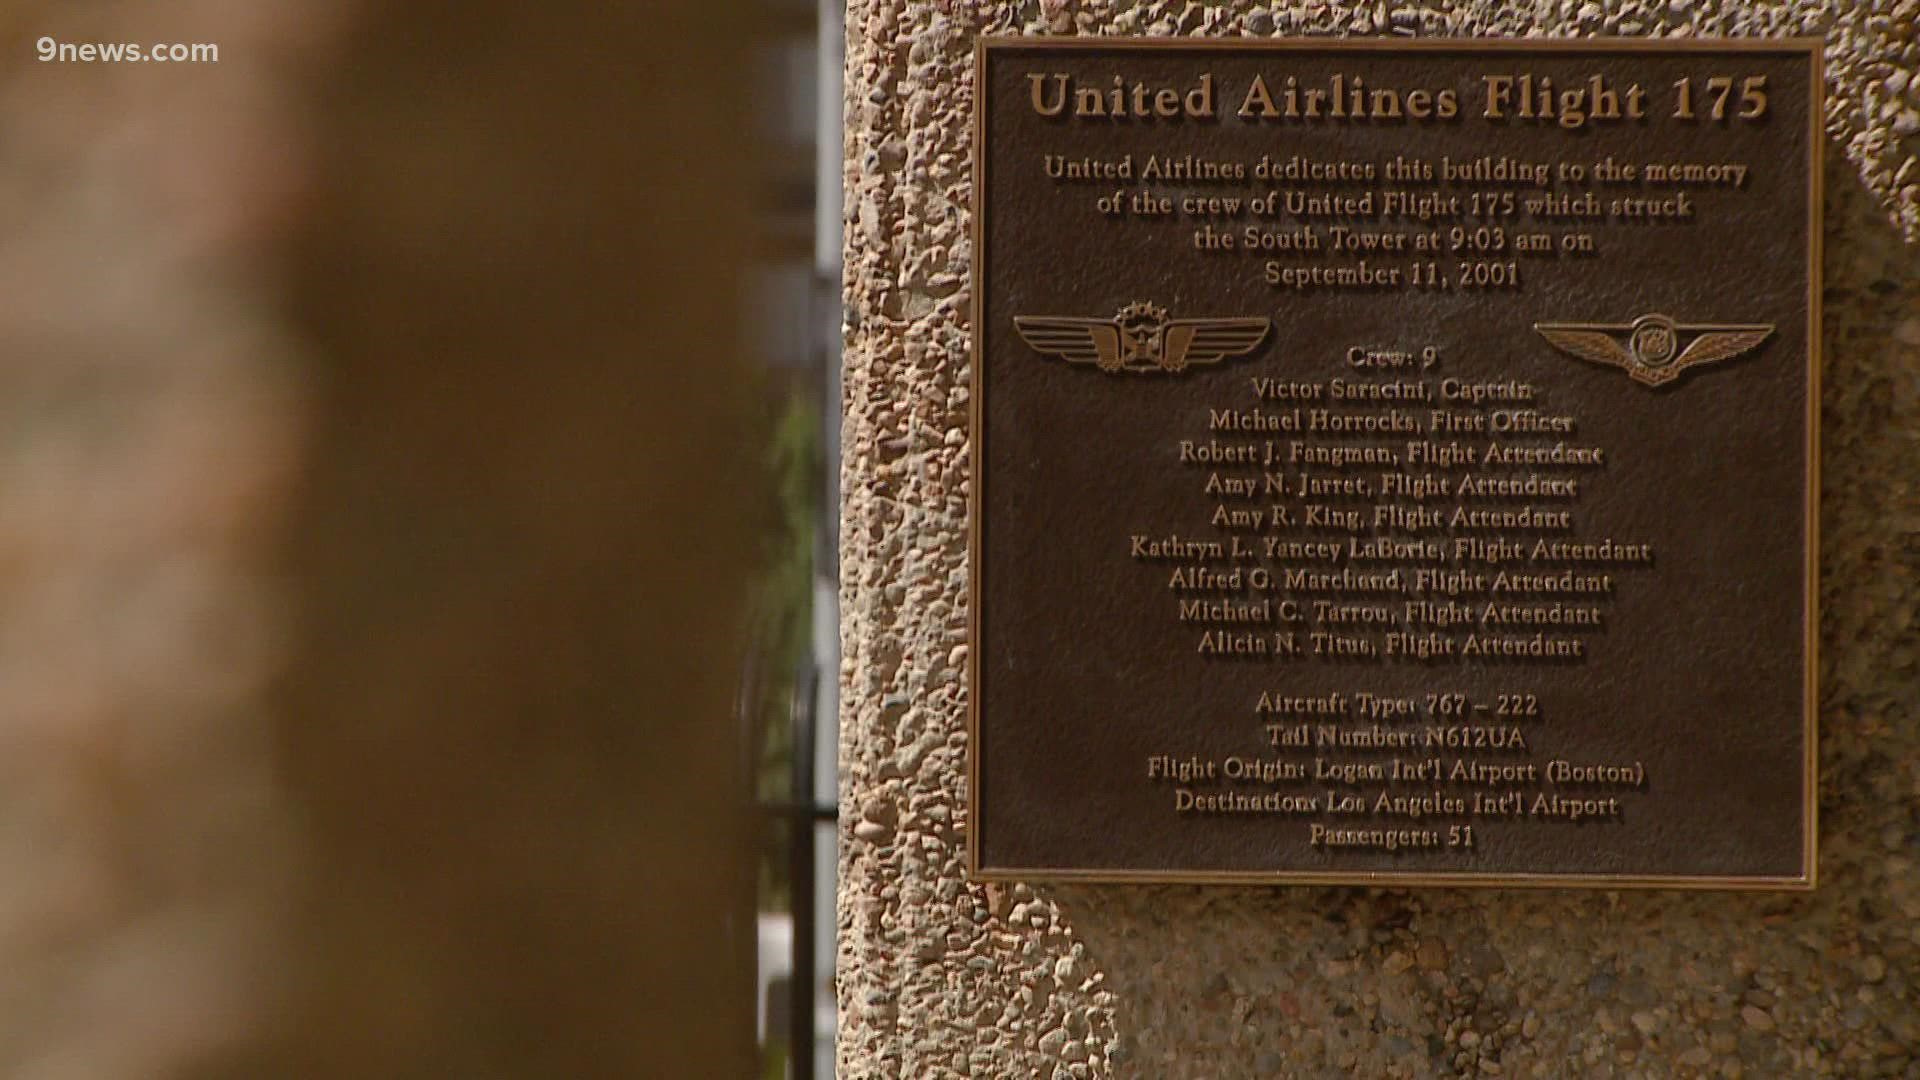 A building at the flight training center was dedicated to crew members on the 20th anniversary of the 9/11 attacks in their memory.